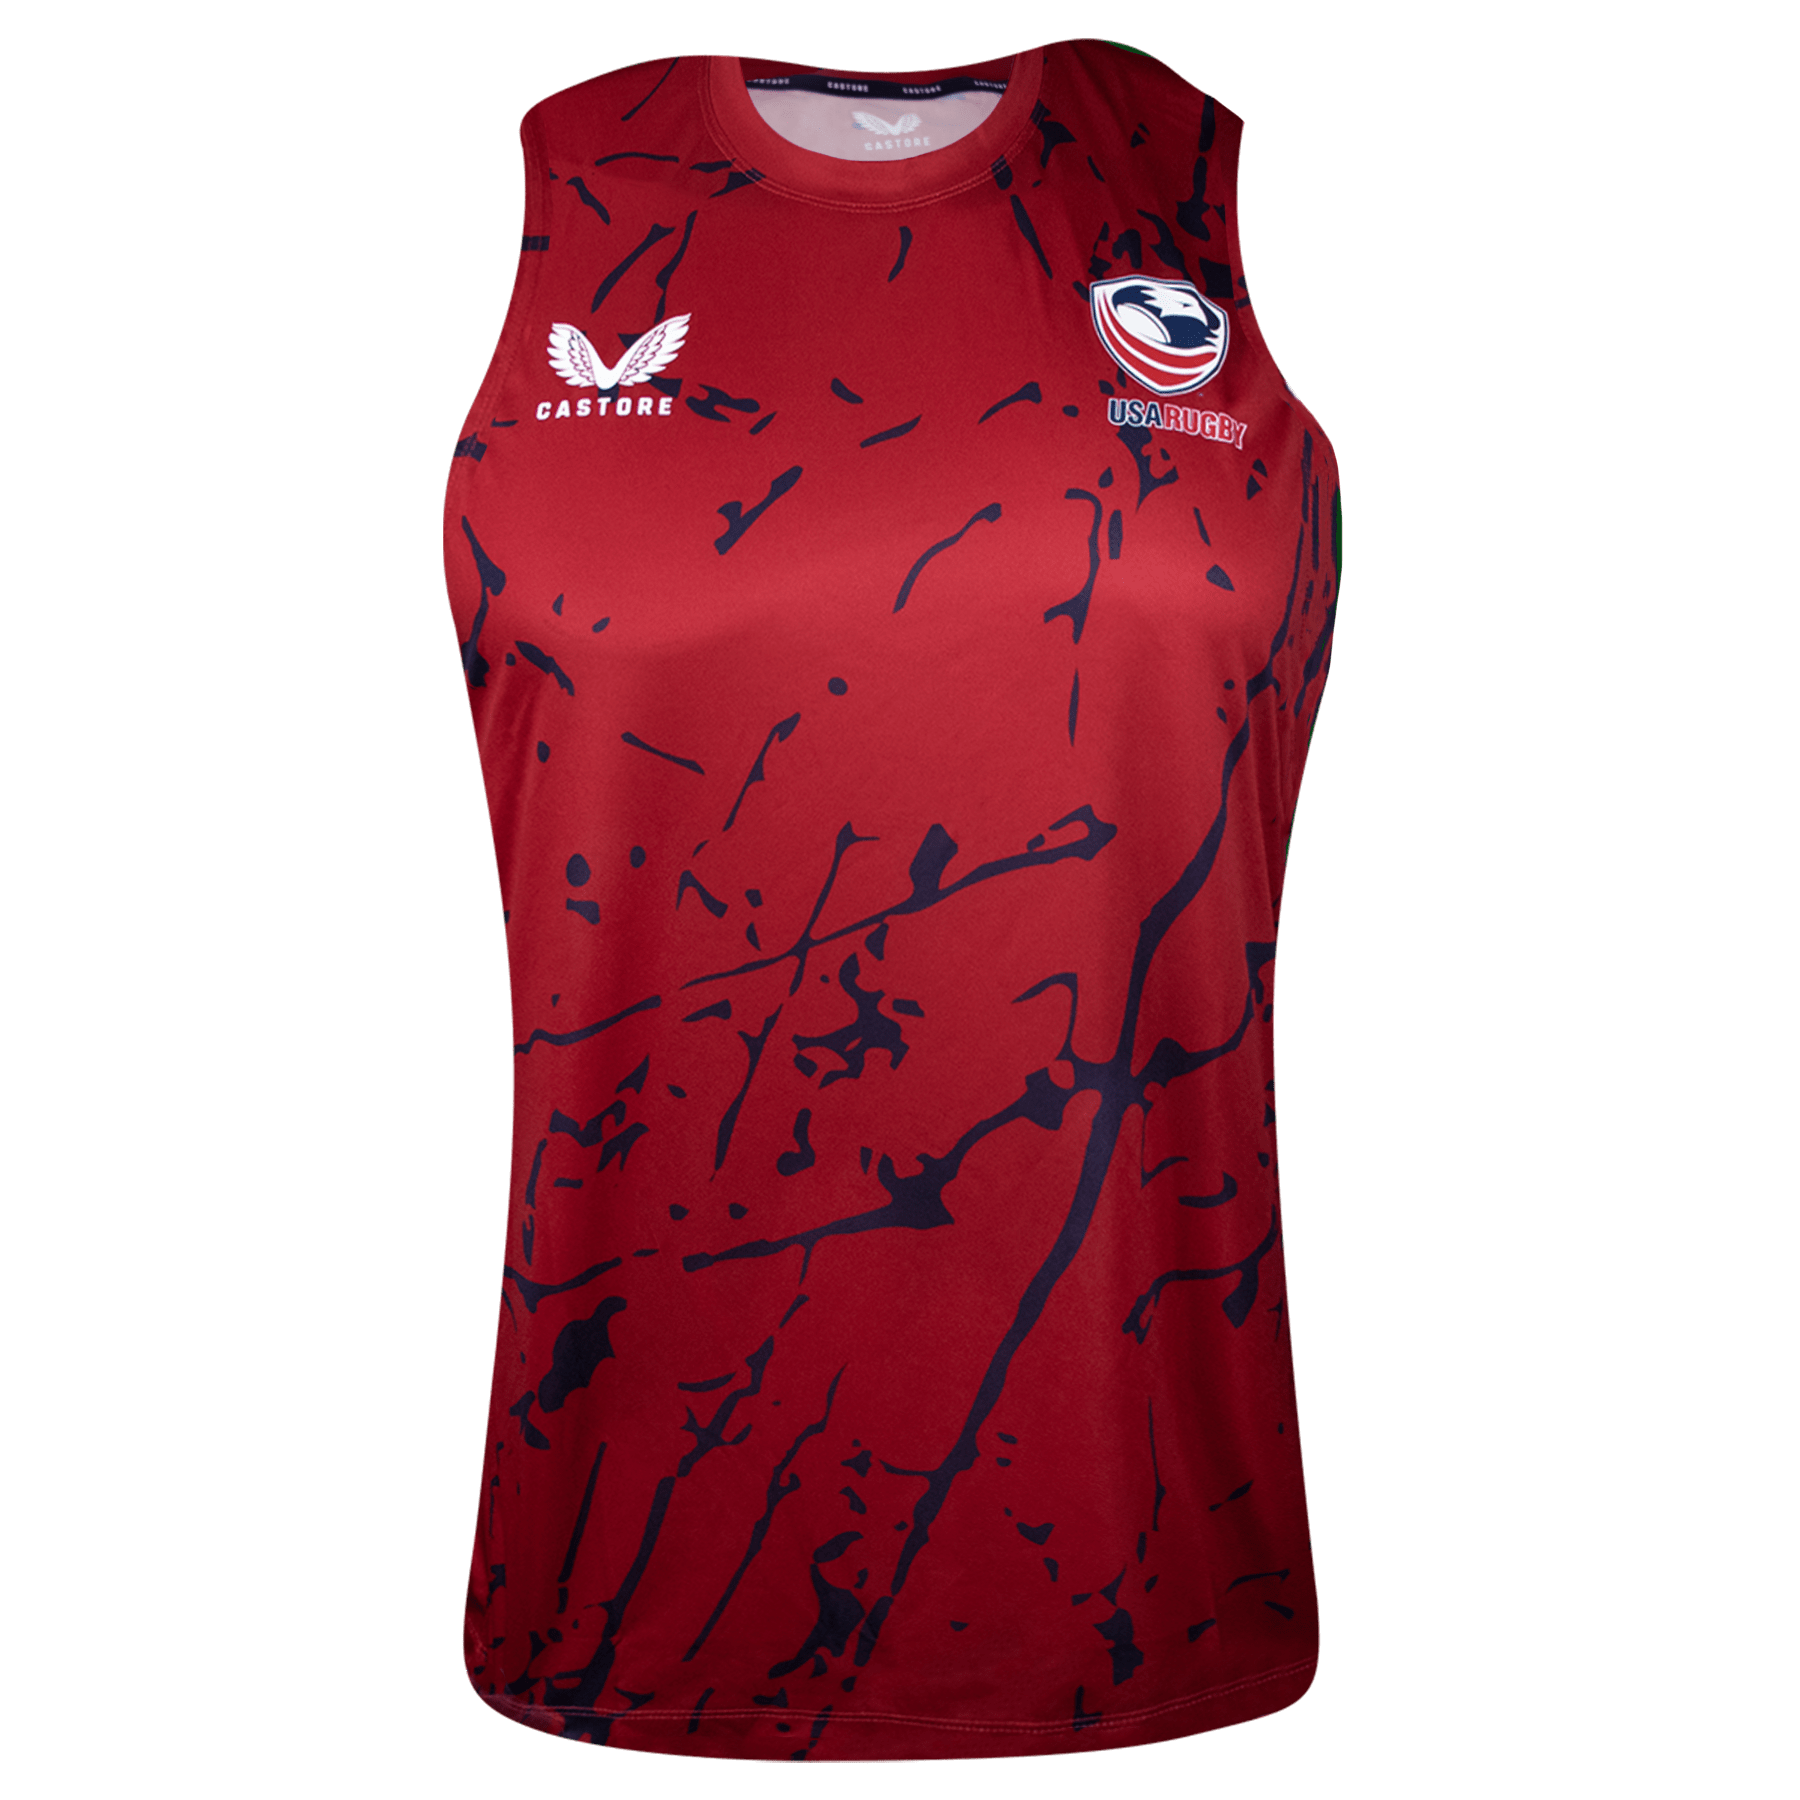 USA Rugby Training Singlet | Castore USAR Tank- Red - World Rugby Shop